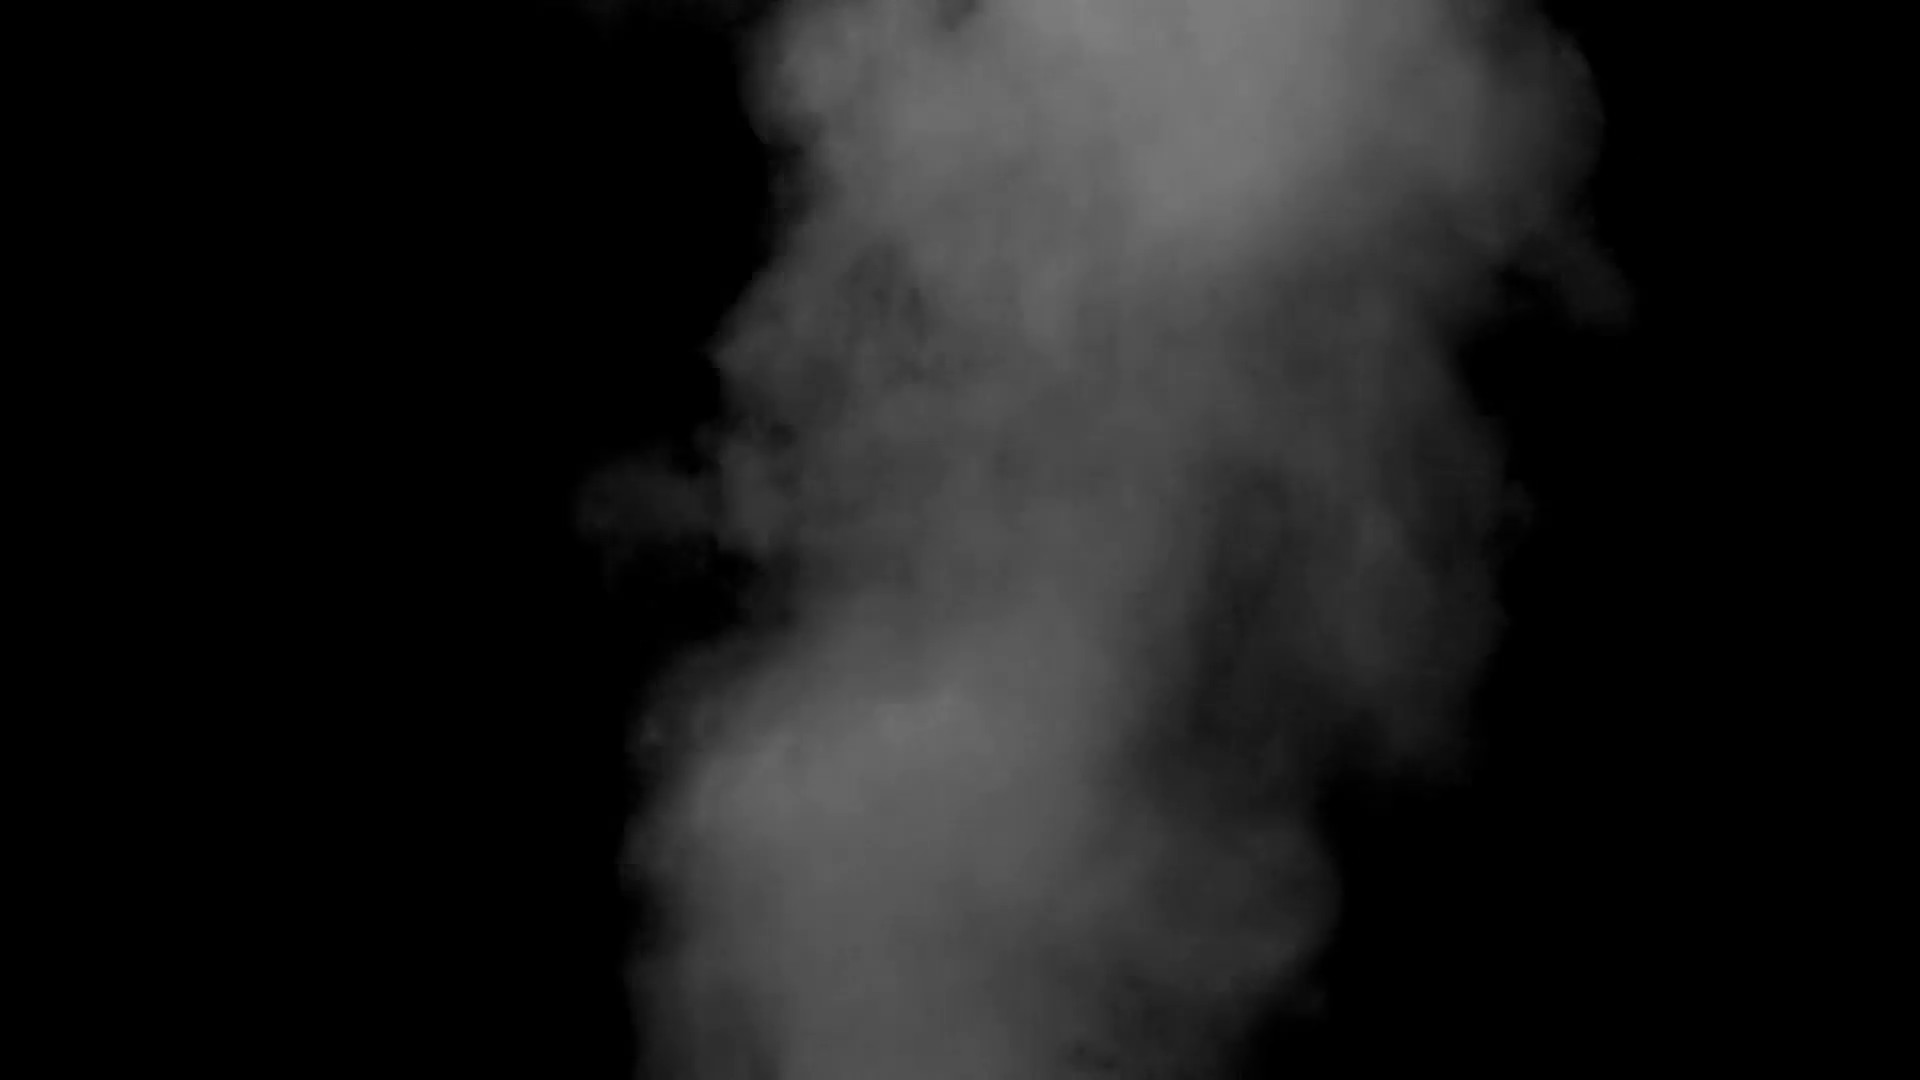 Subscription Library Grey smoke black background steam. Abstract smoke background, desaturated grey steam shapes rising like